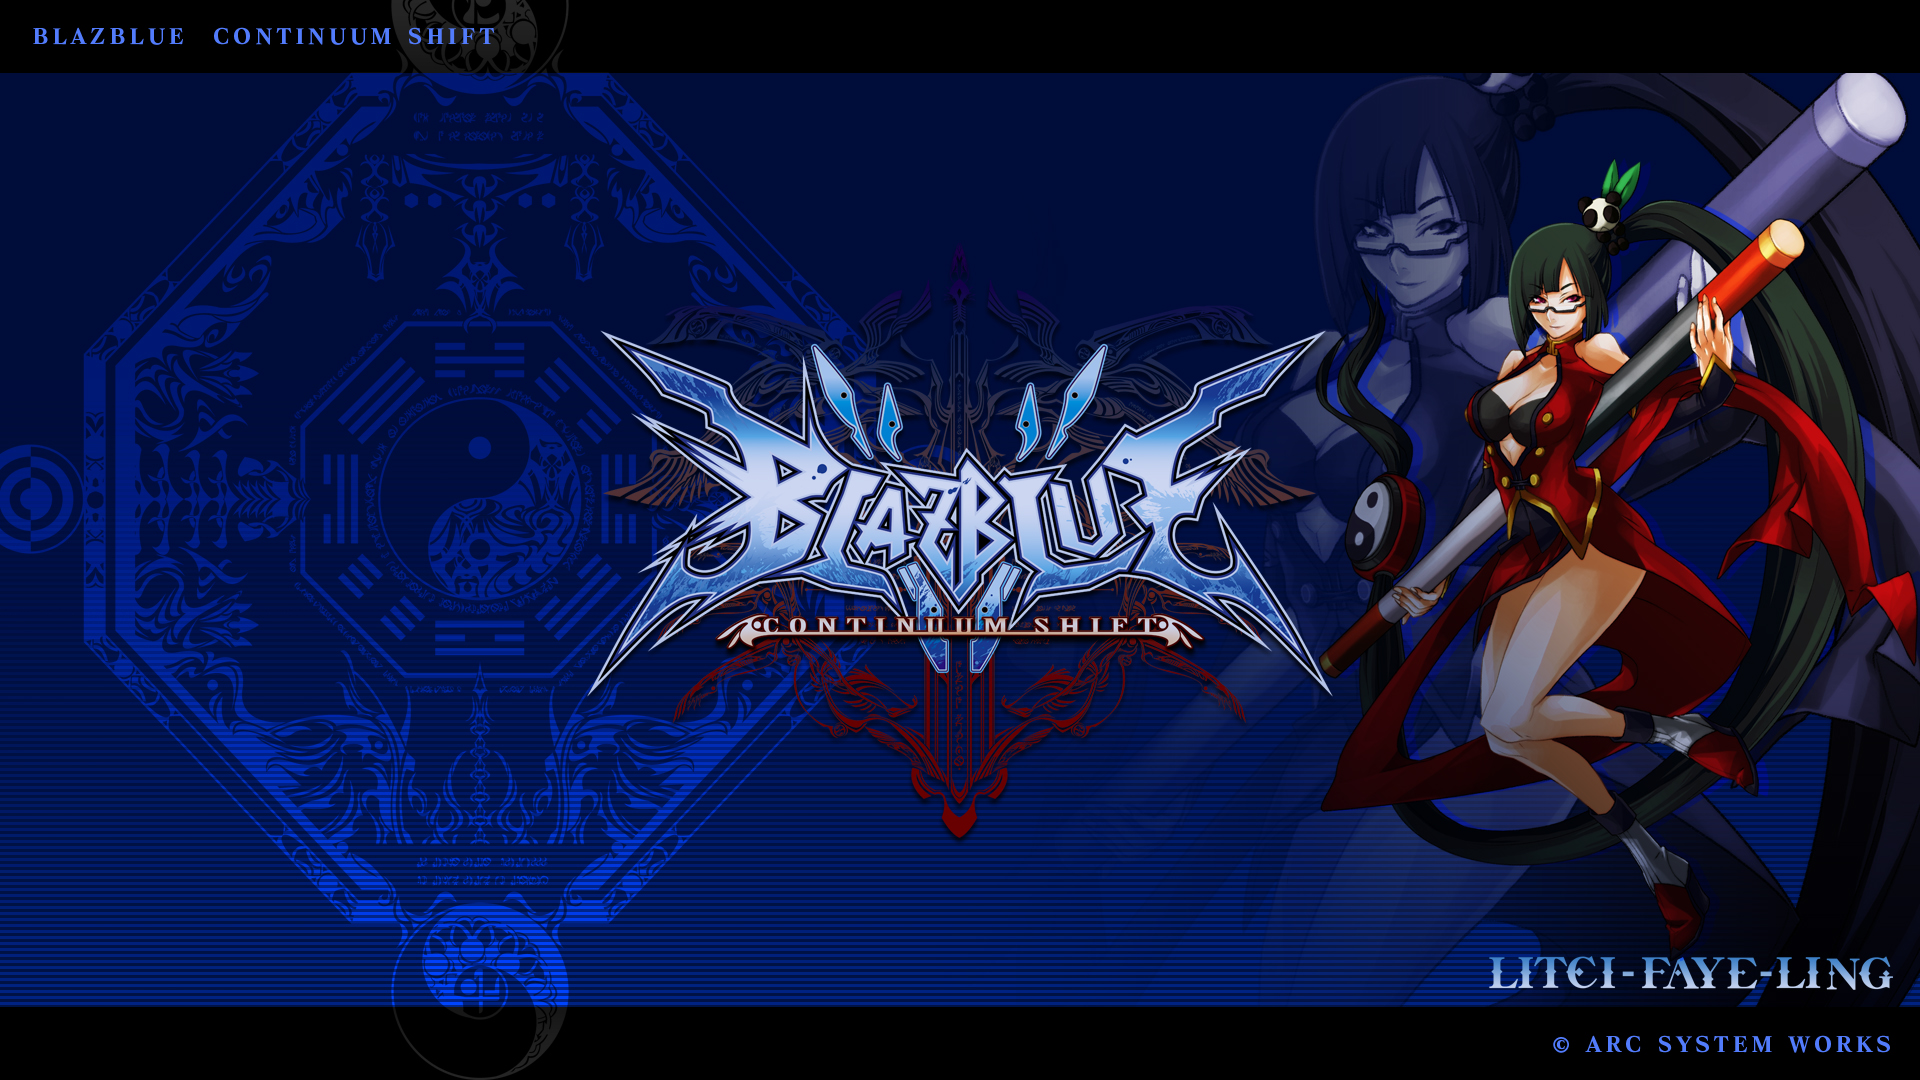 Litchi Faye Ling in a vibrant BlazBlue: Continuum Shift video game wallpaper.